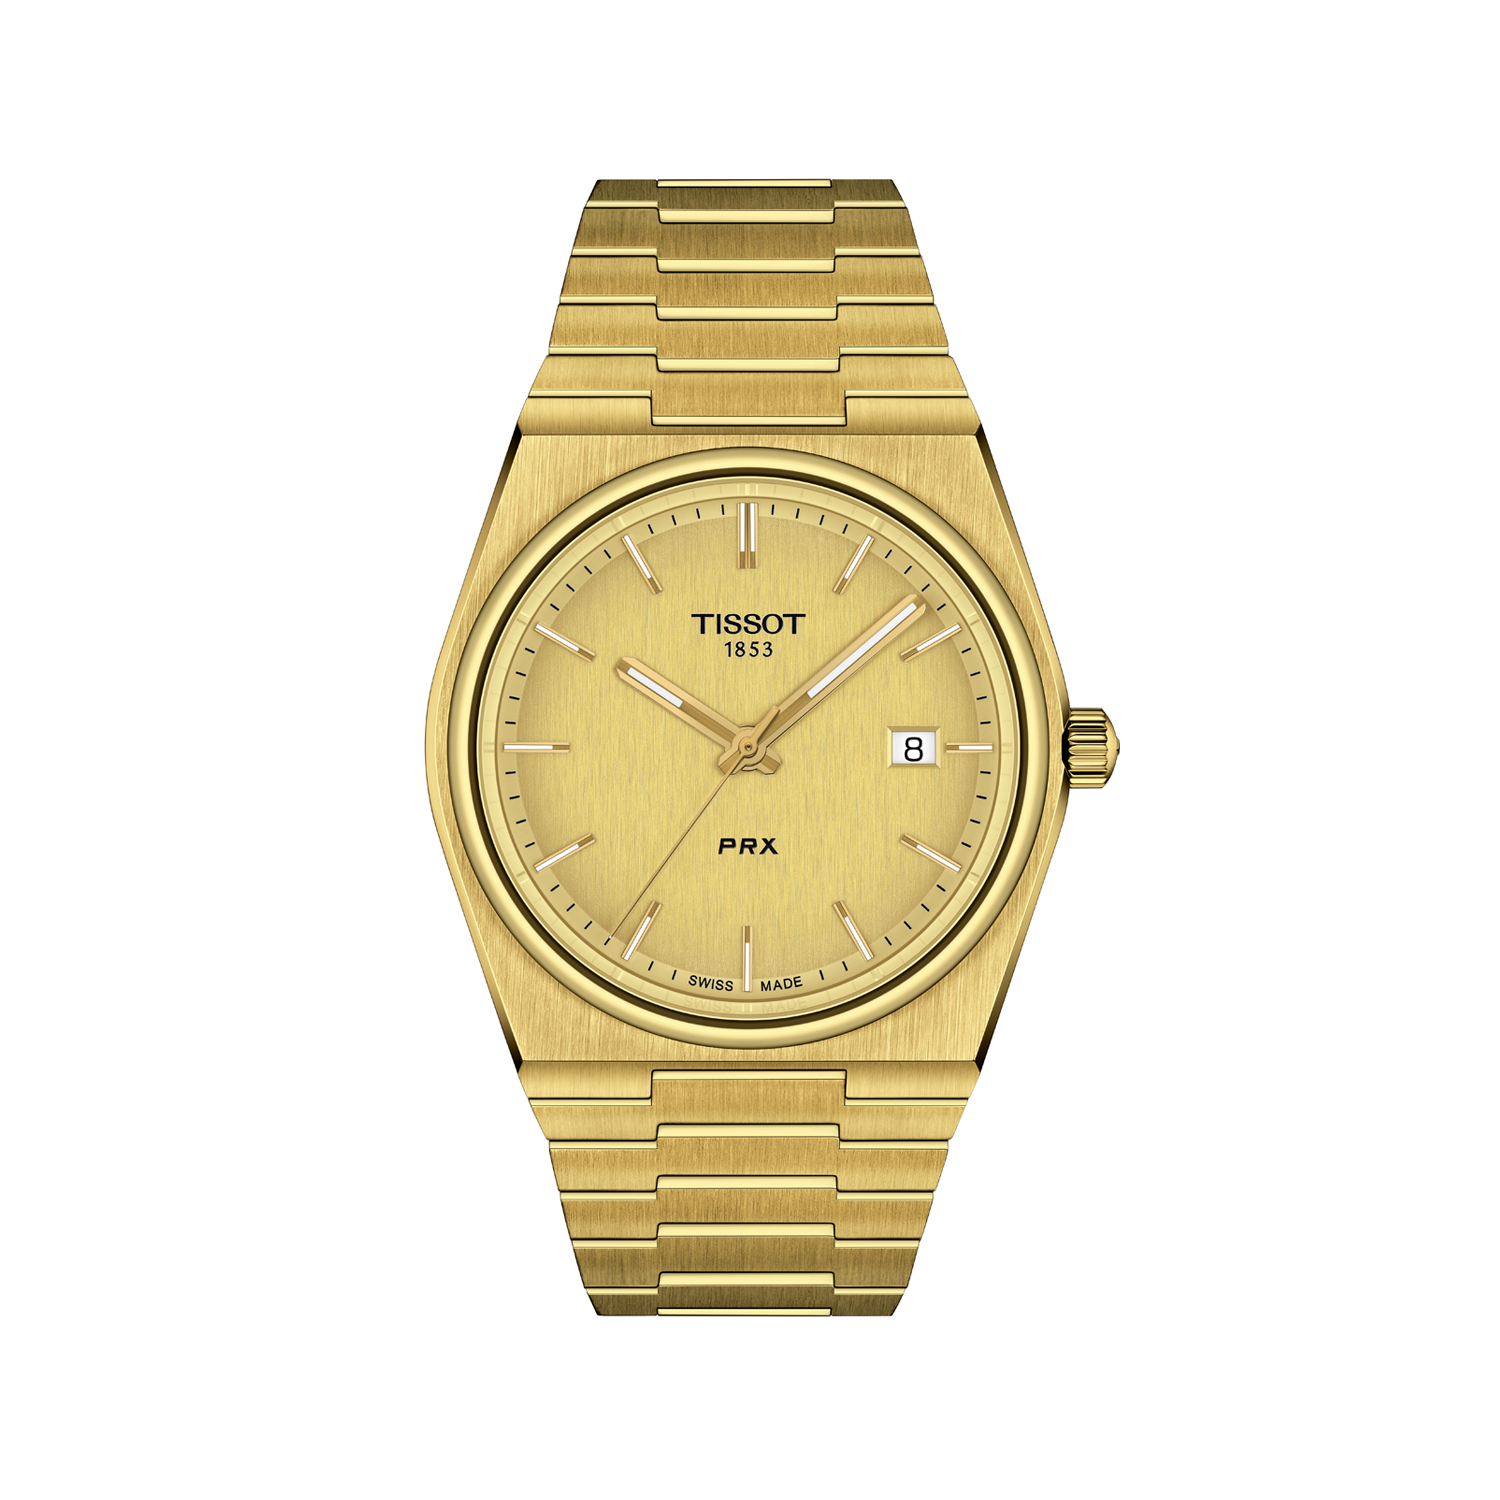 Tissot PRX Yellow Gold Plated Watch - 40mm